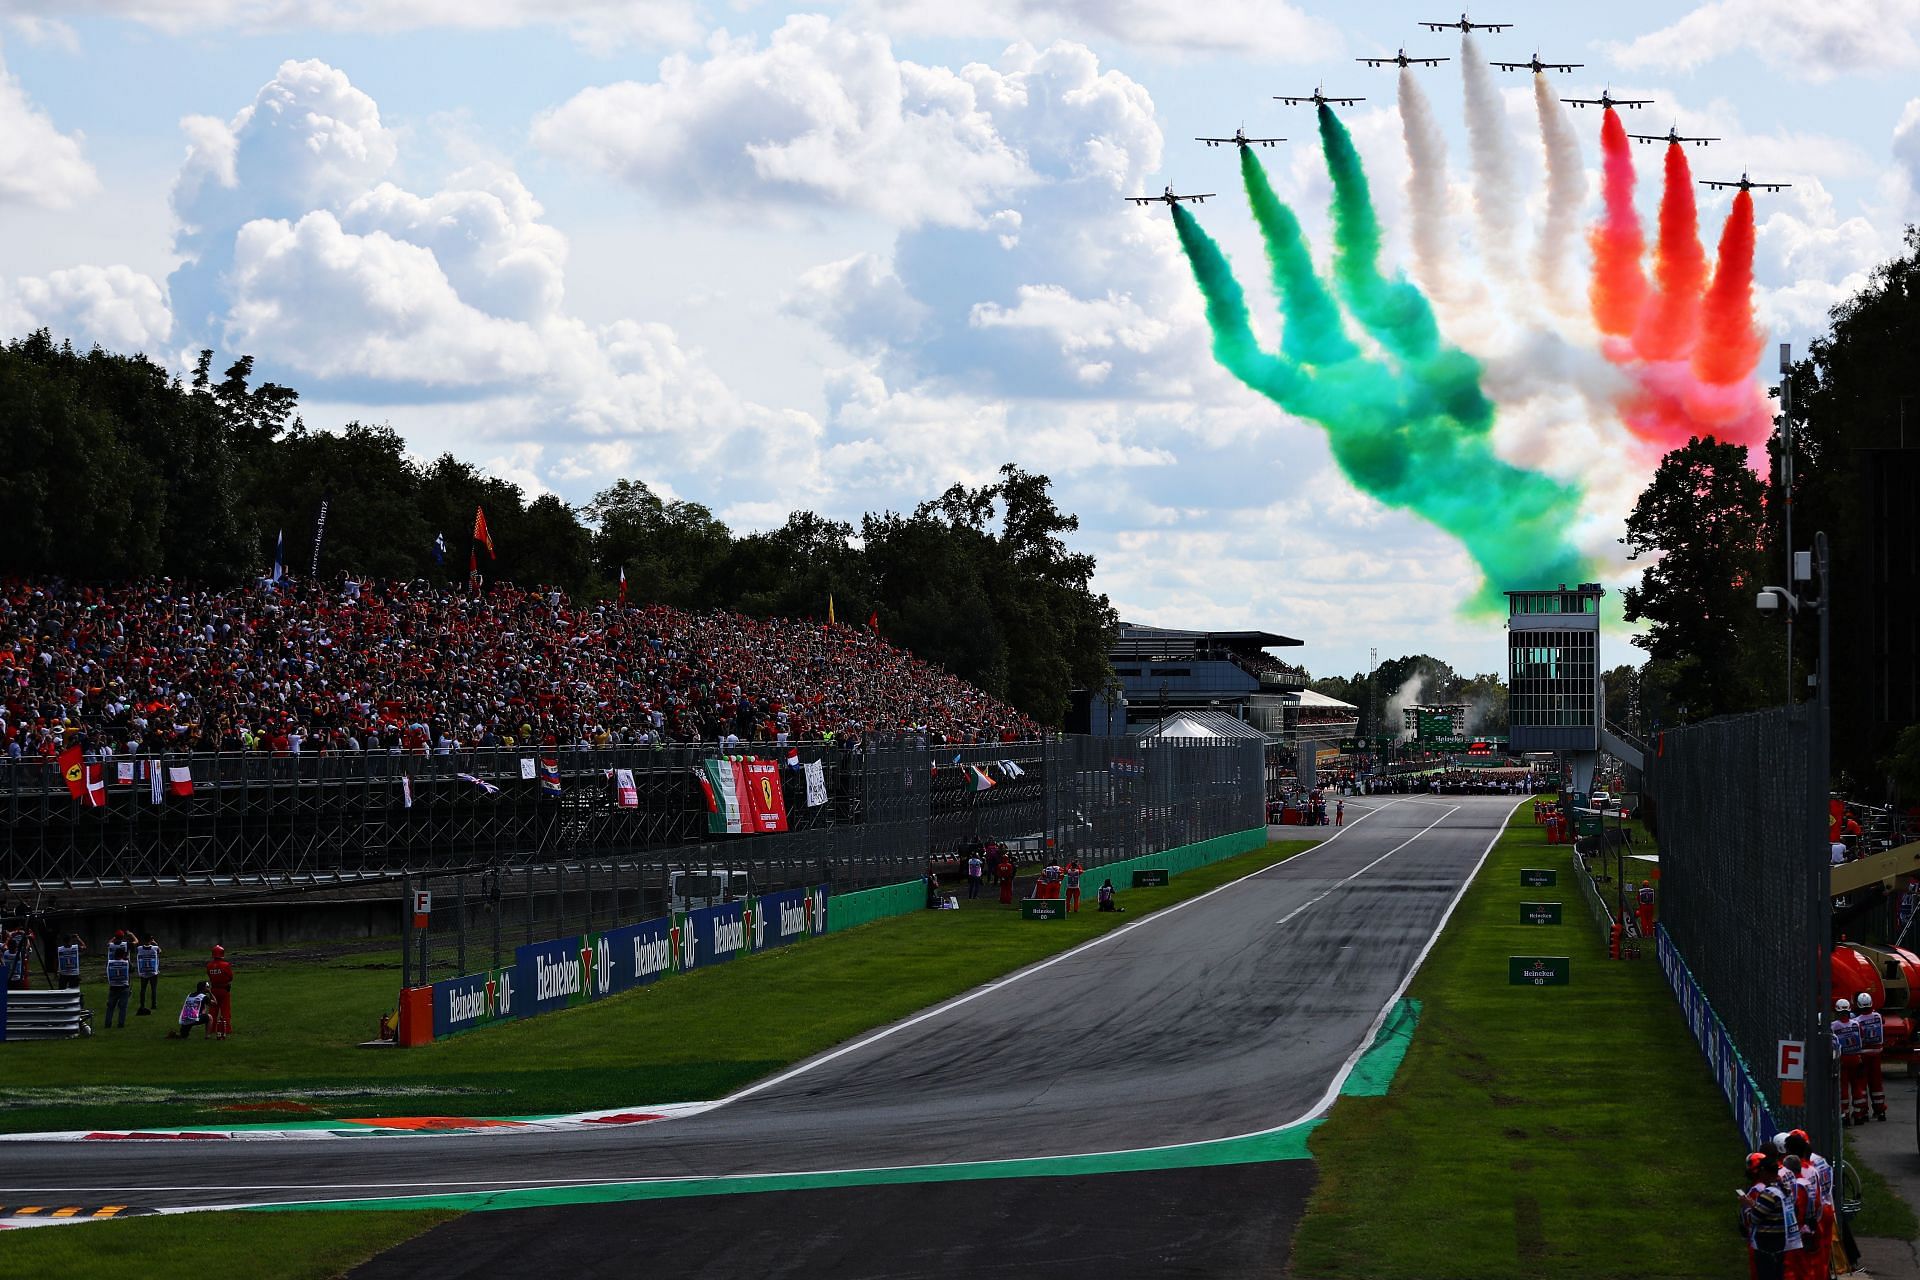 F1 plans to phase out airshows completely in a step towards sustainability for the sport.